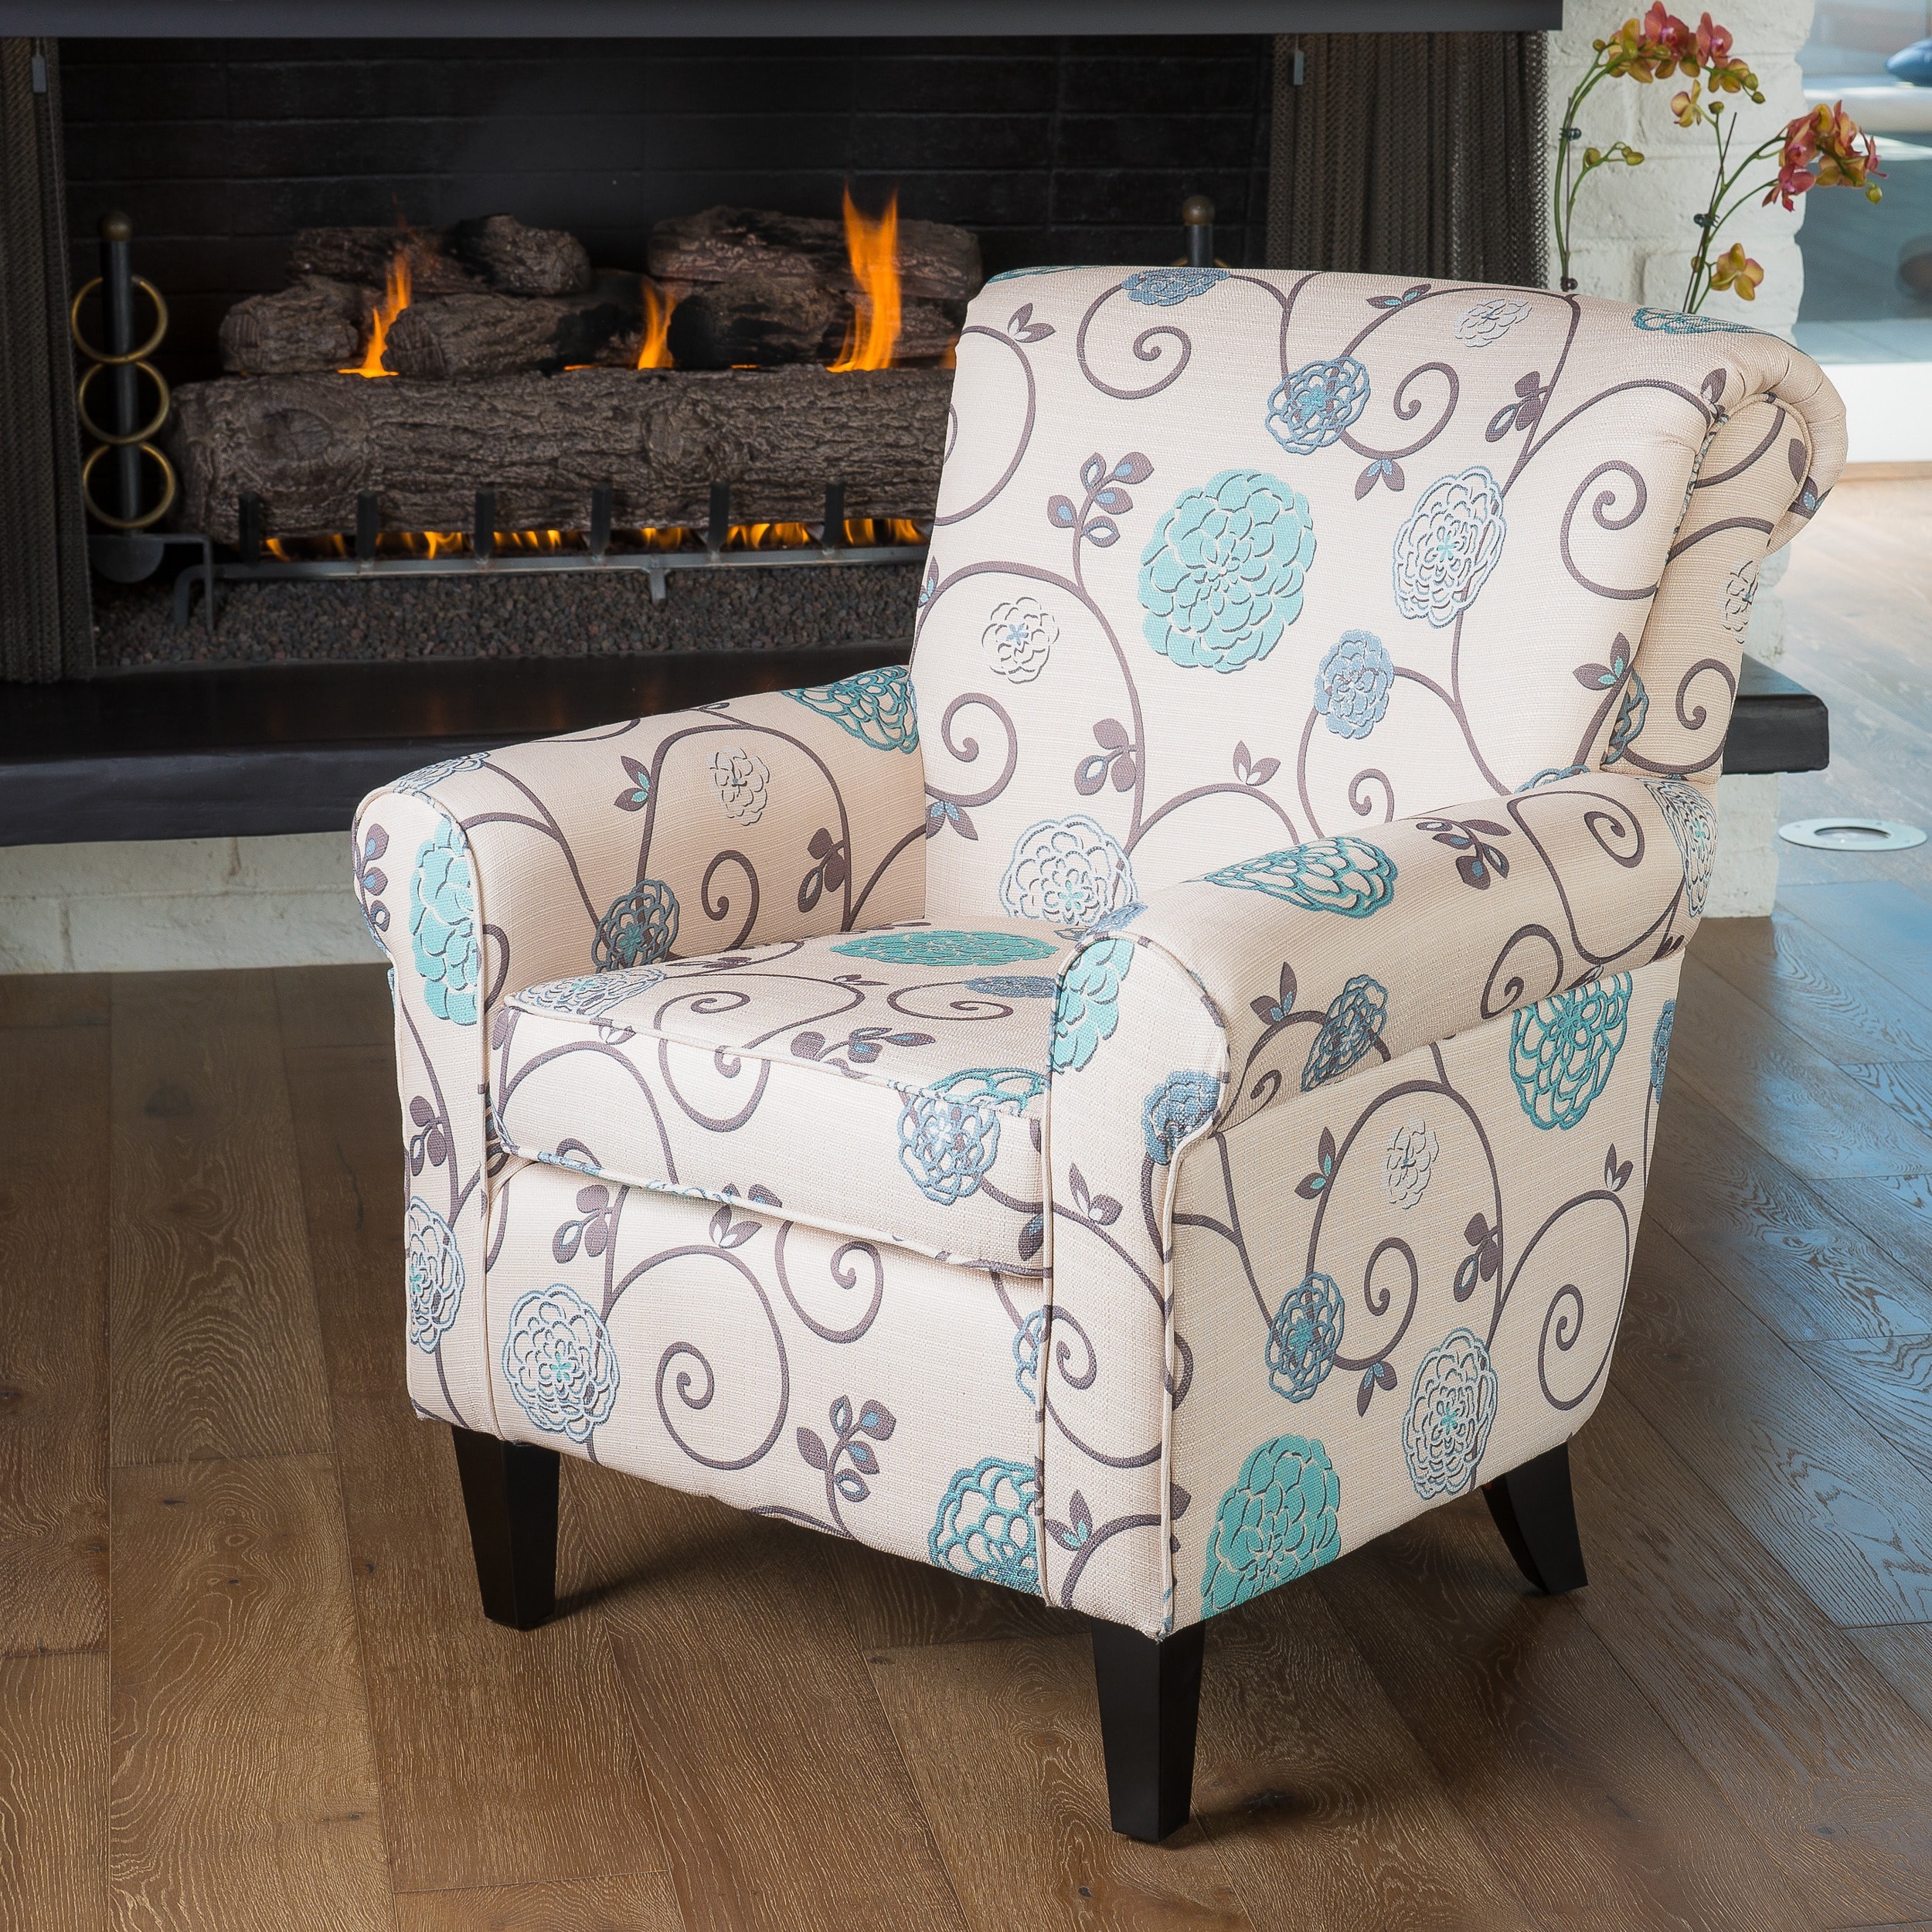 Christopher Knight Home Roseville Fabric Floral Club Chair